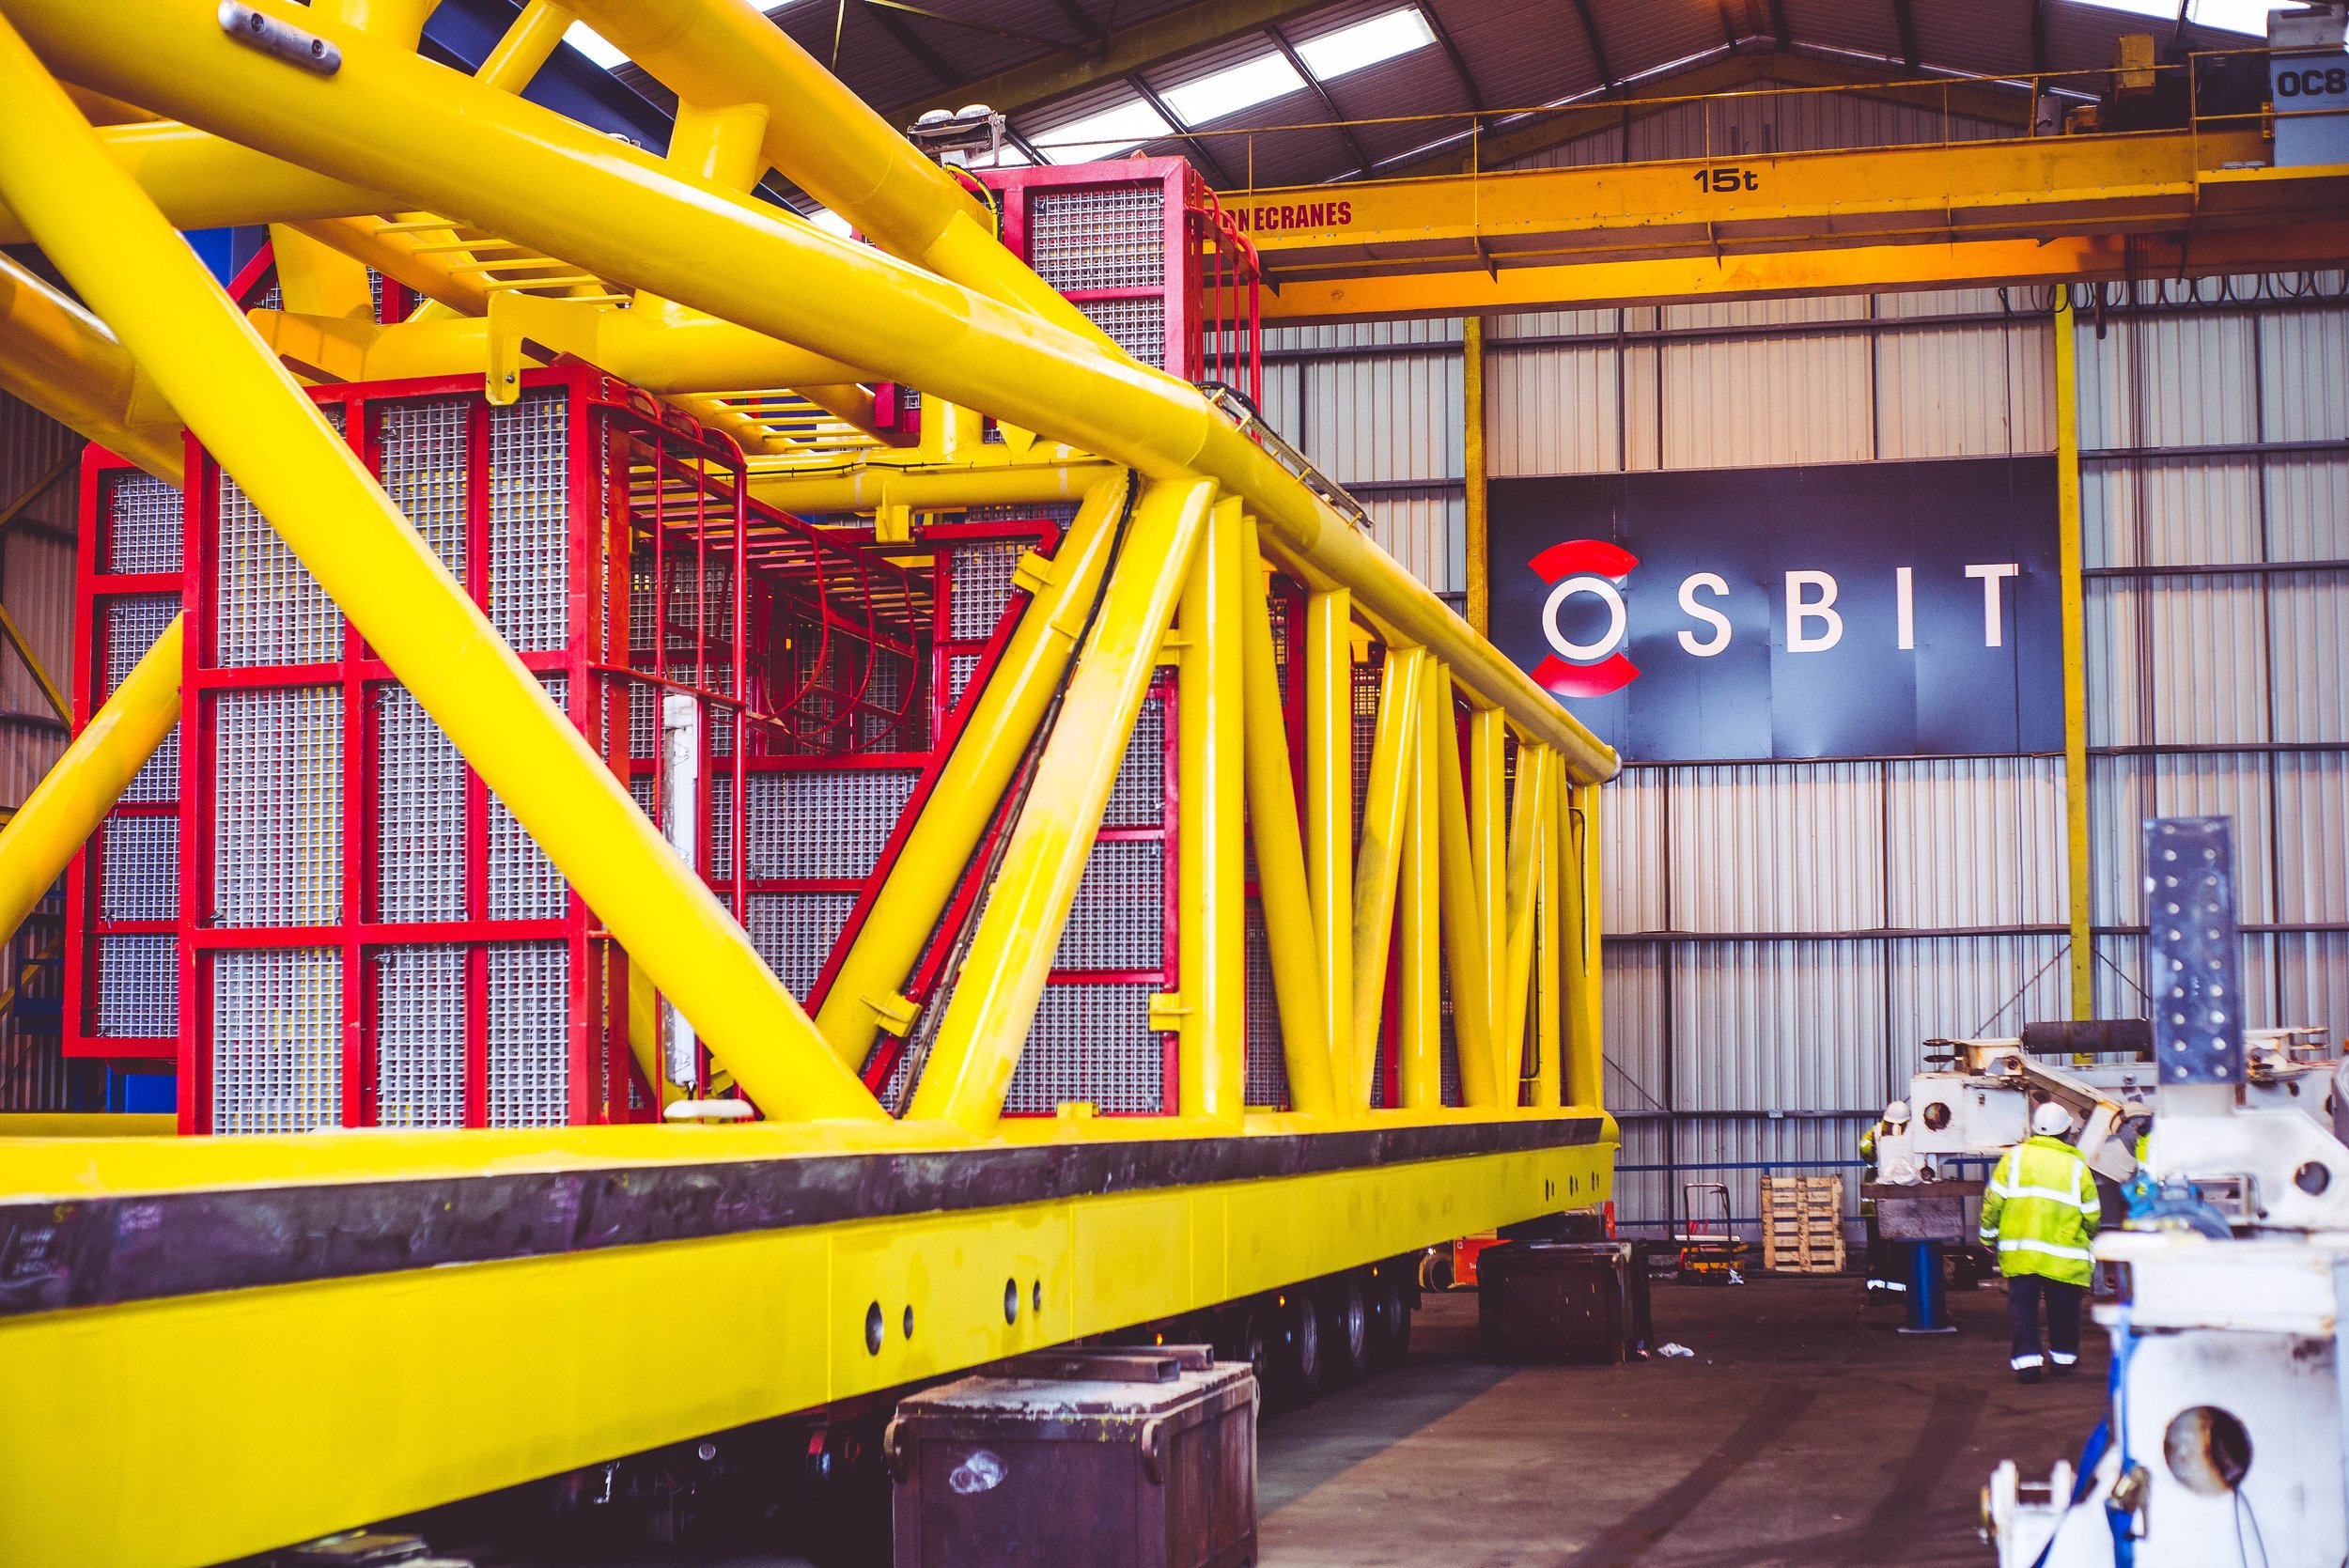 Osbit boat landing system for offshore access in Port of Blyth facility